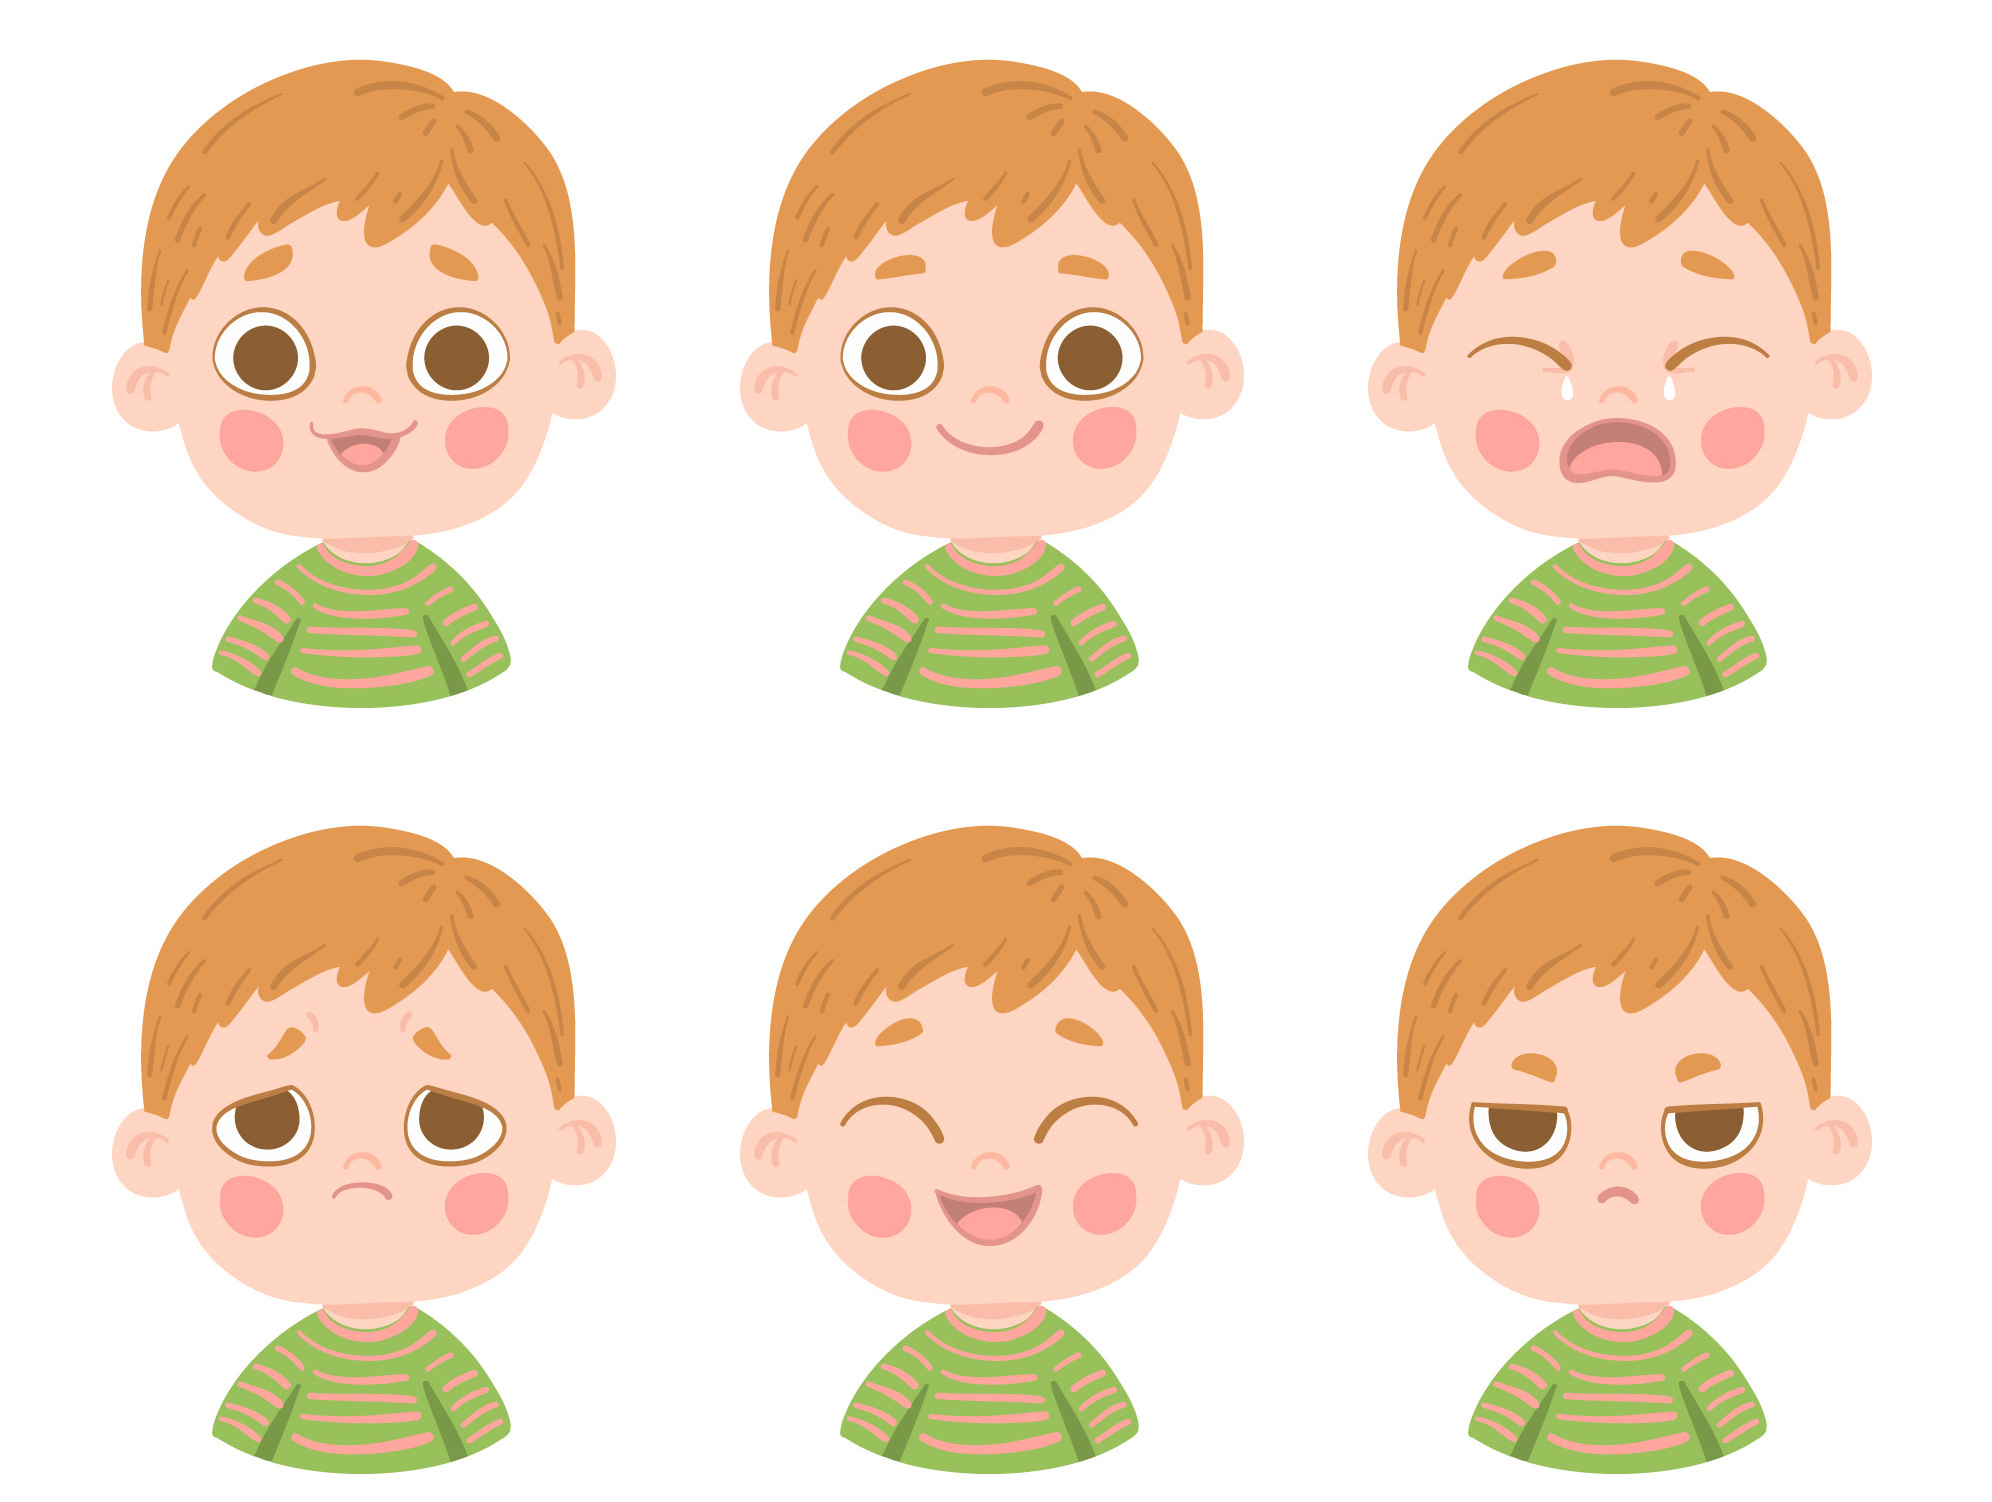 Emotion Expression Activities for Toddlers: Fun & Easy at Home